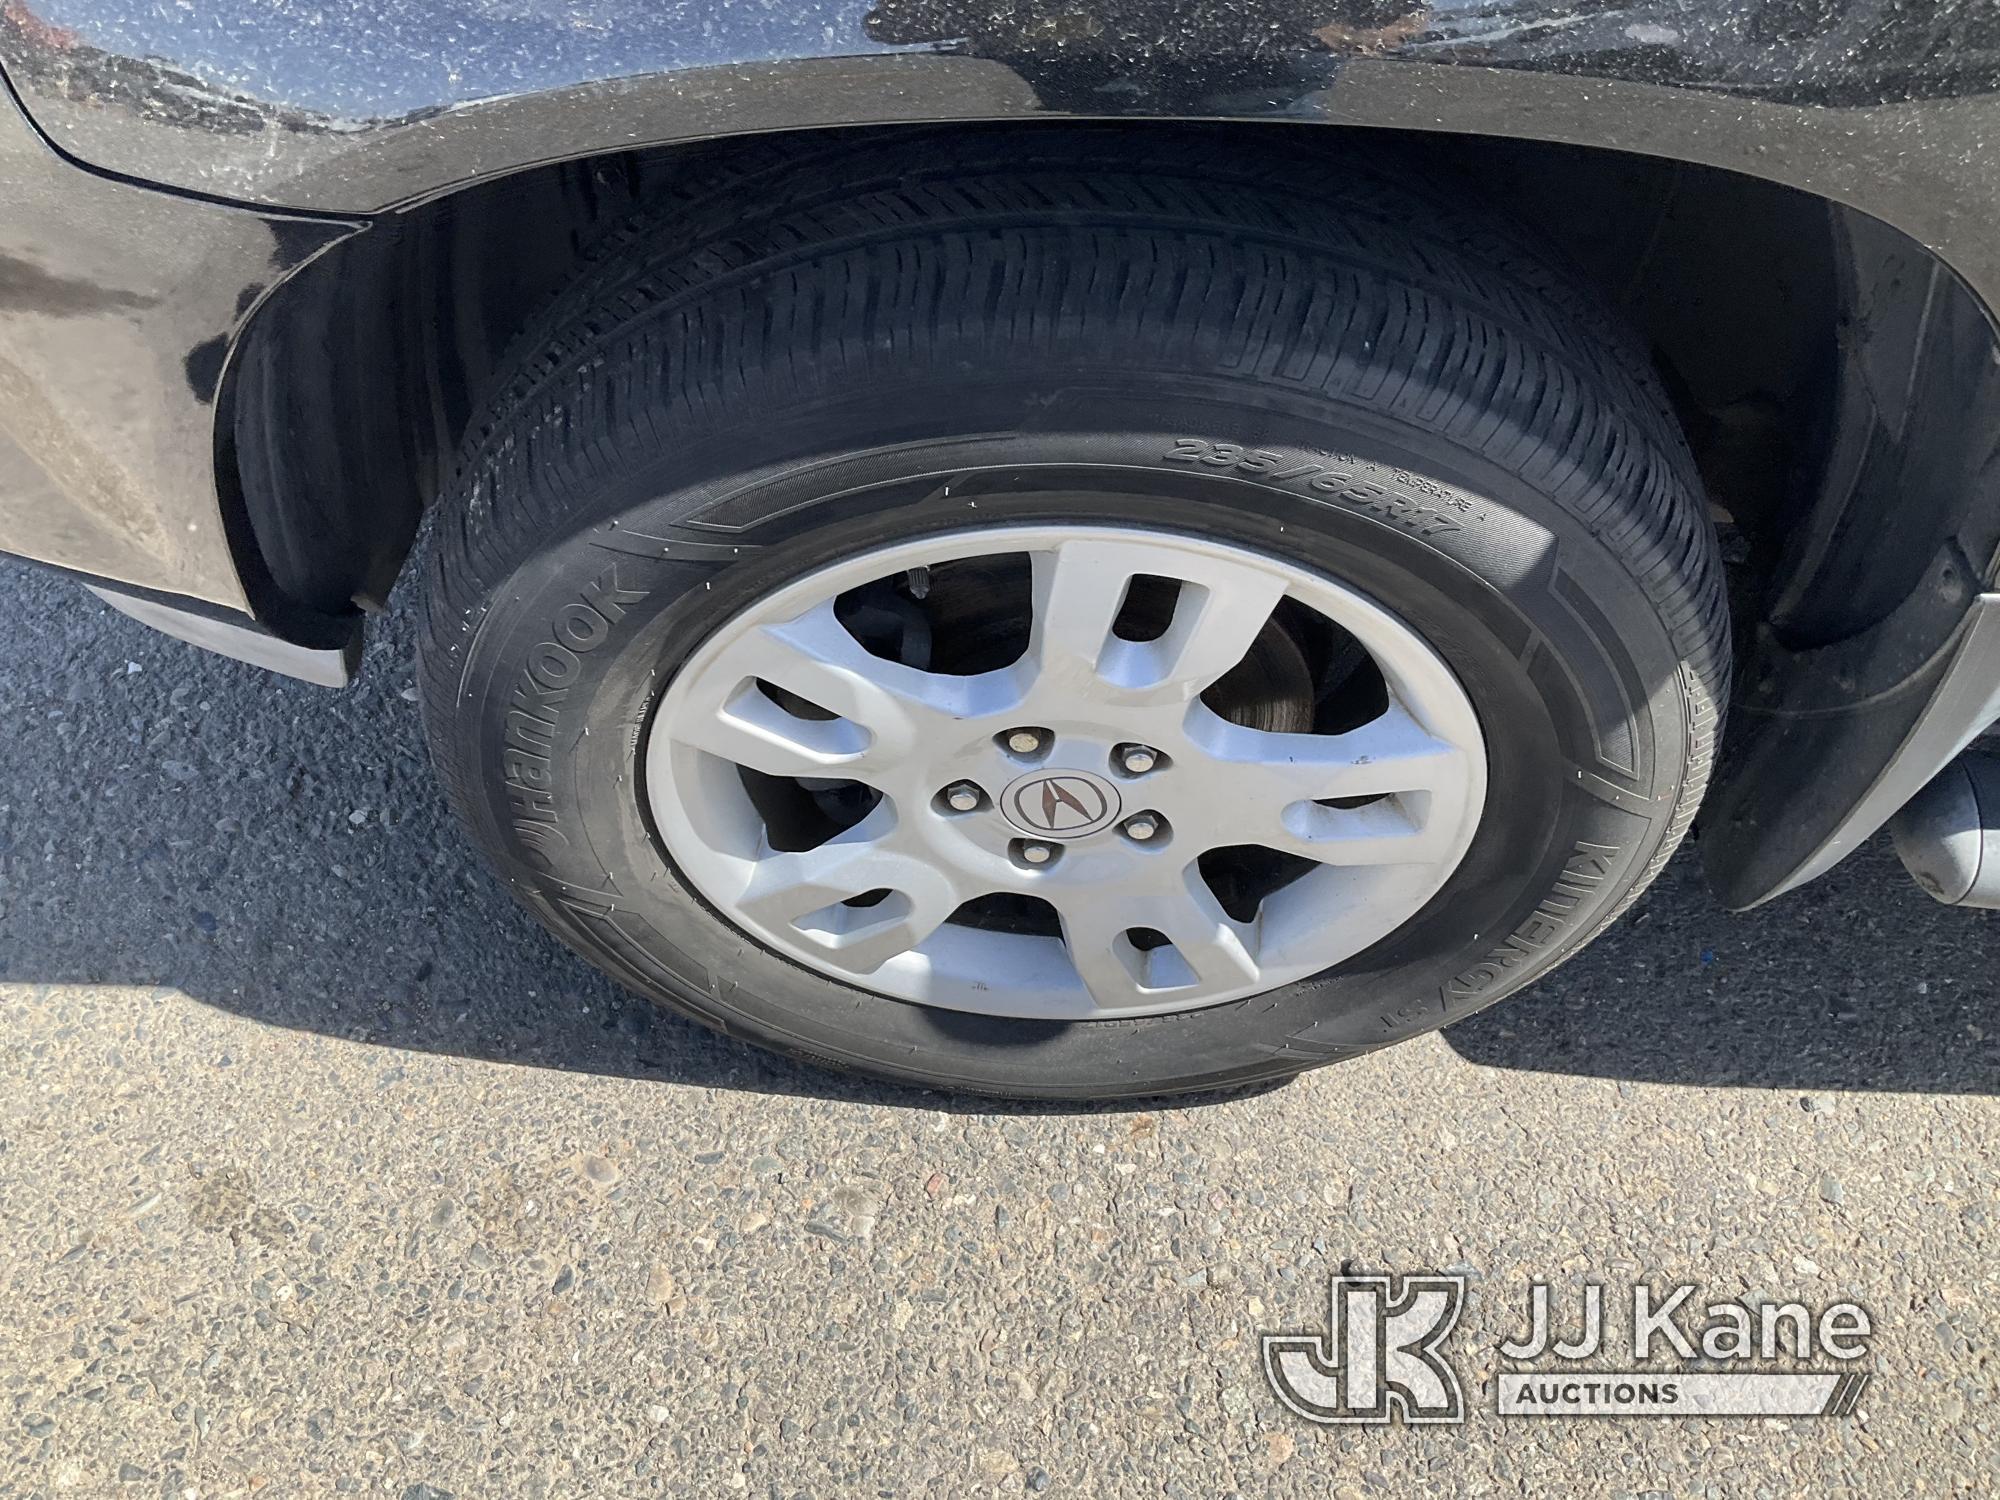 (Dixon, CA) 2006 Acura MDX AWD 4-Door Sport Utility Vehicle Not Running, Condition Unknown) (Check E